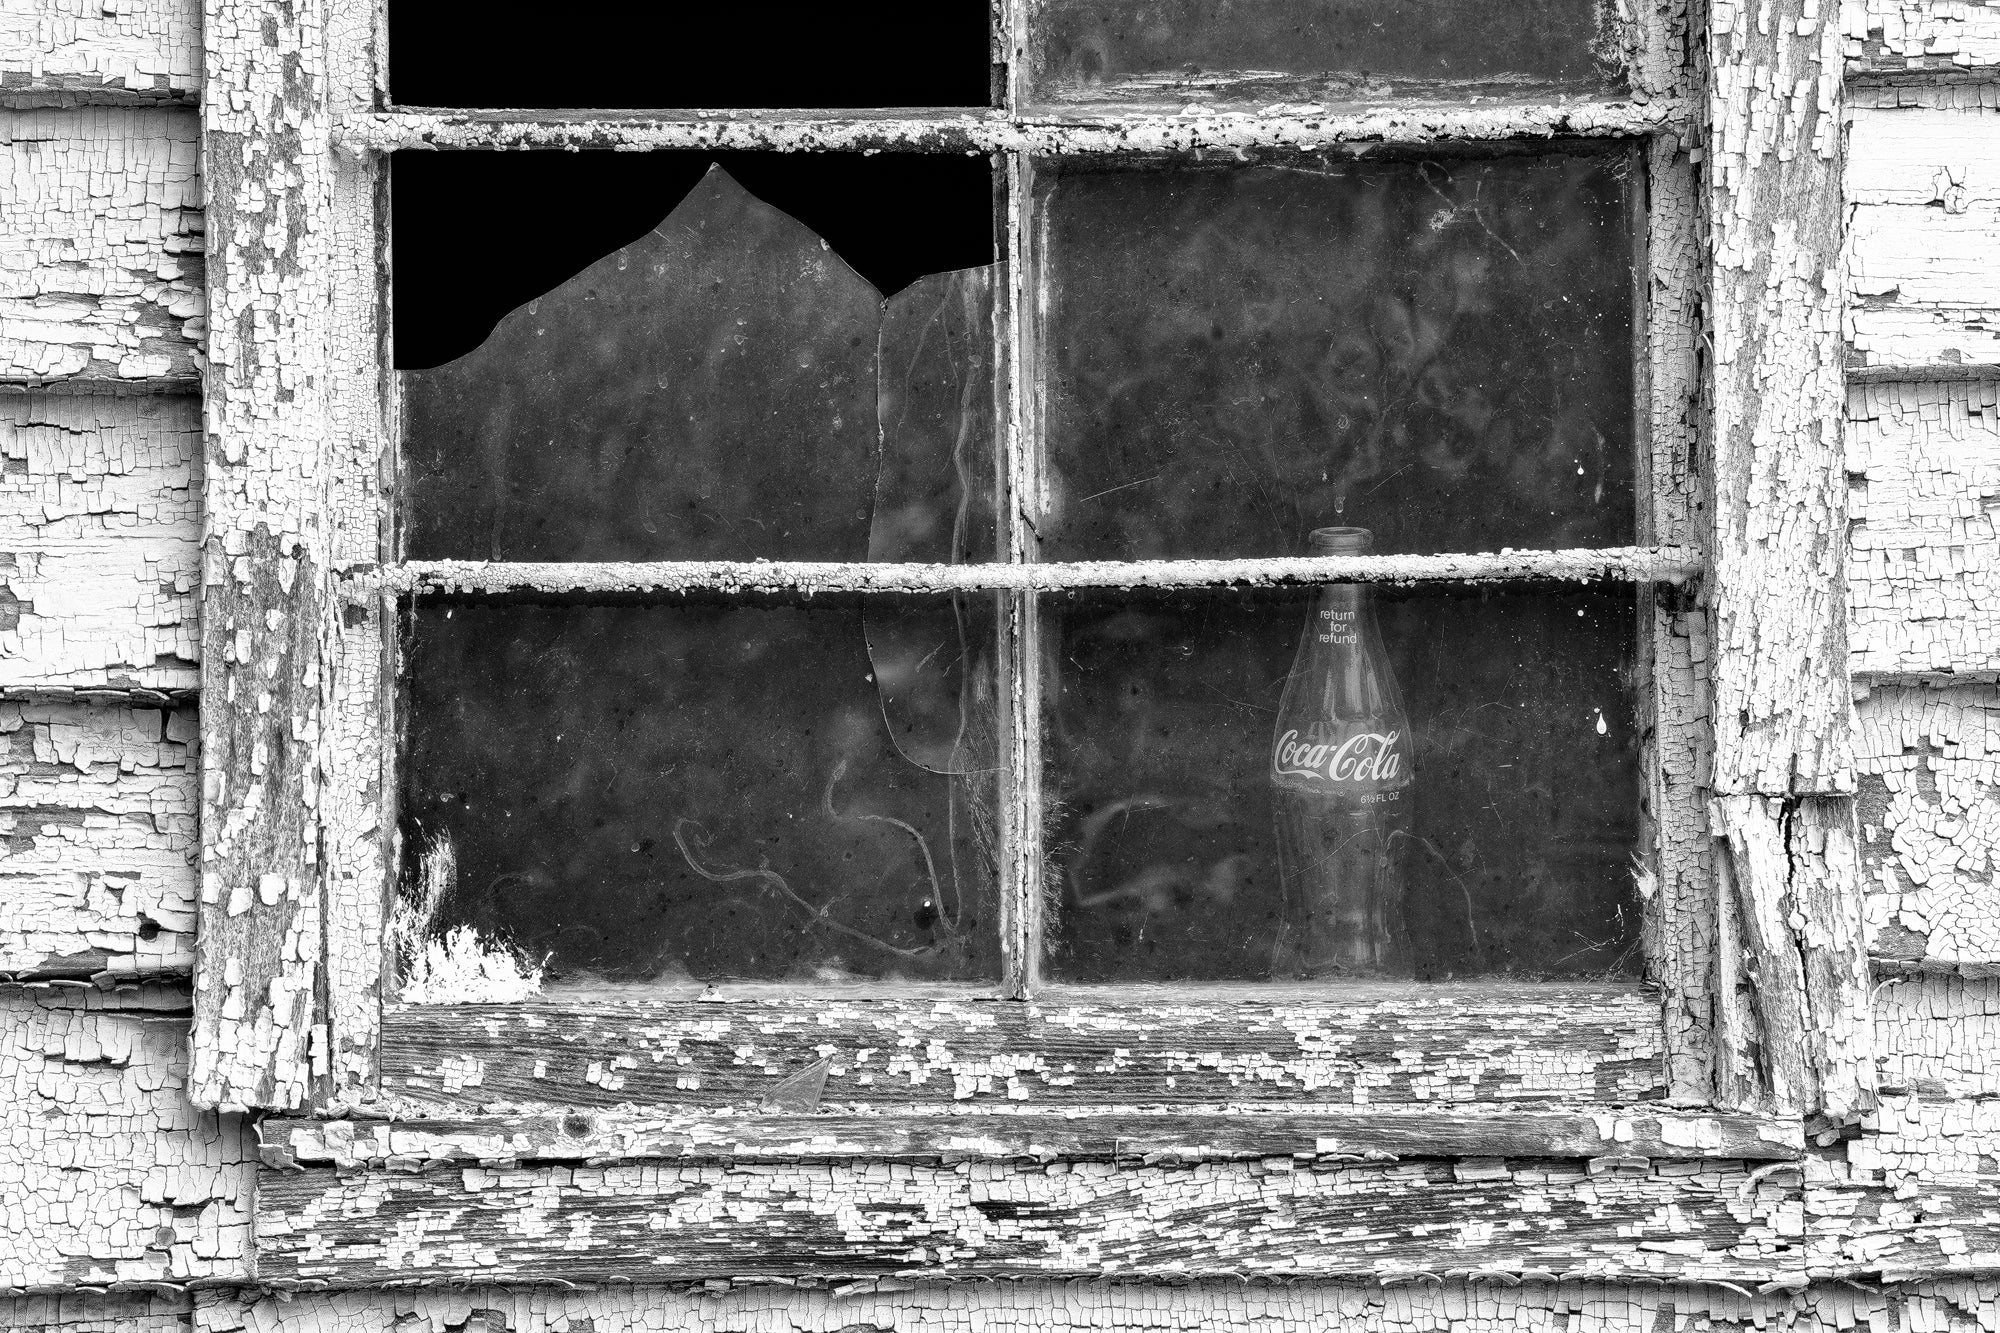 Window with Empty Cola Bottle - Black and white photograph by Keith Dotson.